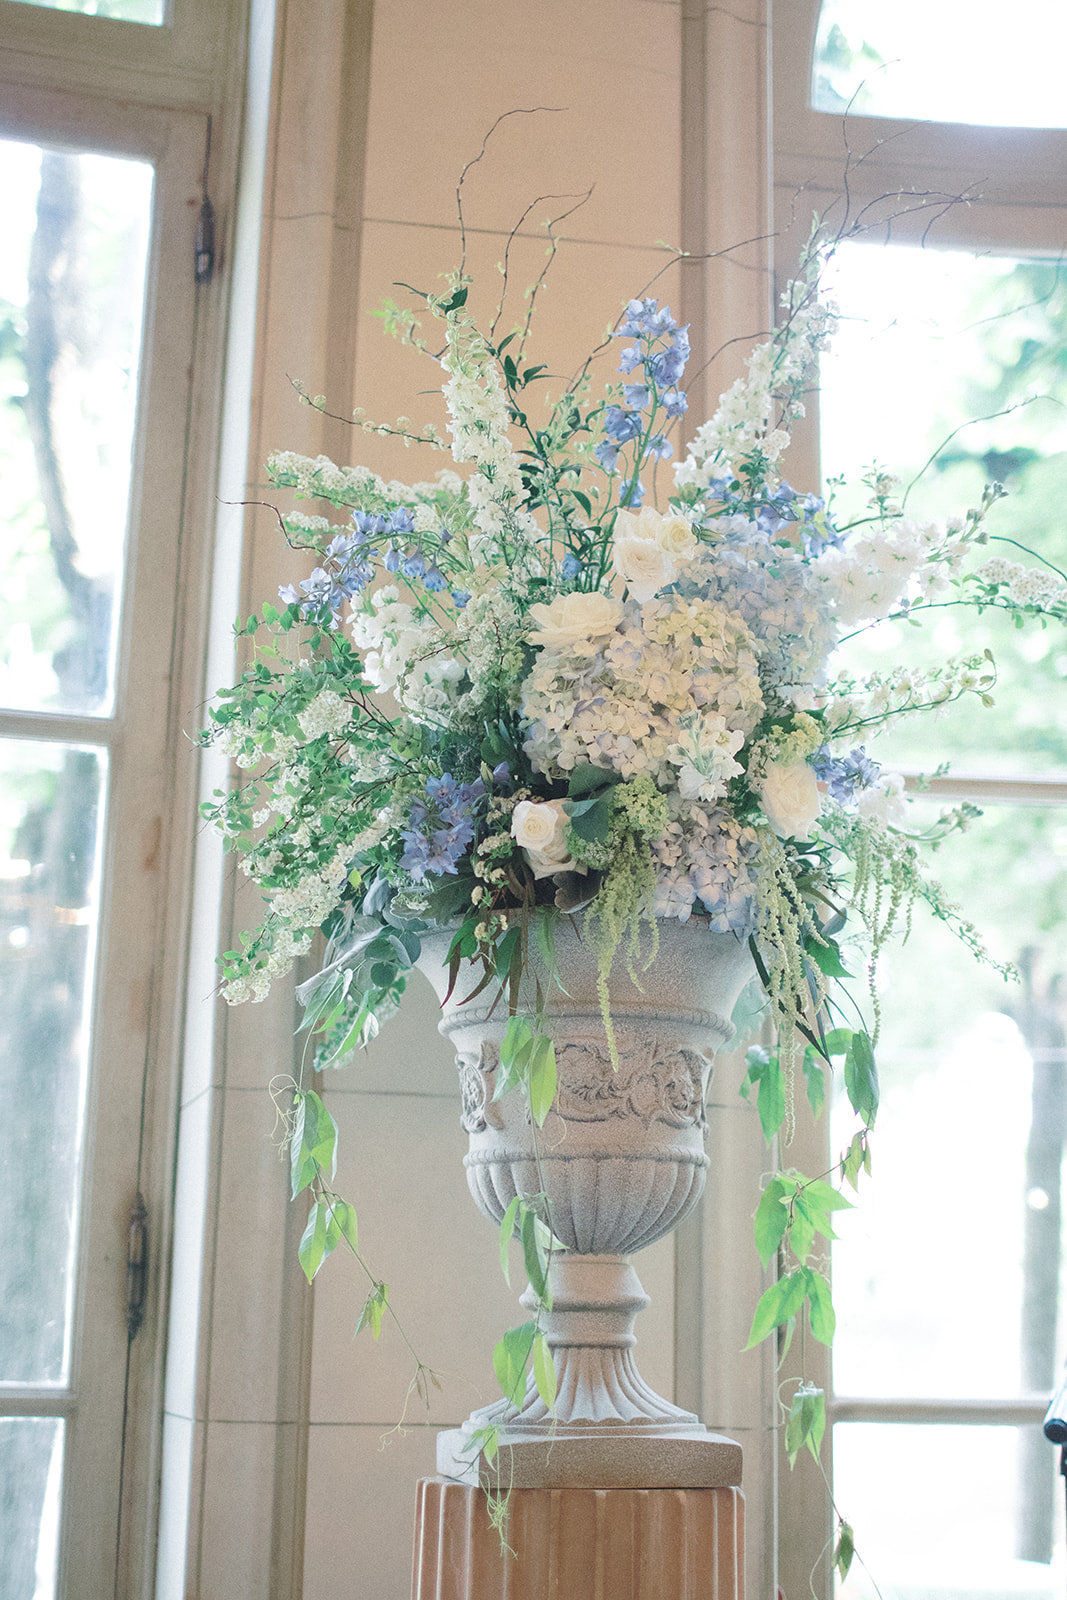 Large urn holding blue and white flowers and draping greenery as a backdrop for a wedding ceremony at the Meridian House in Washington, DC